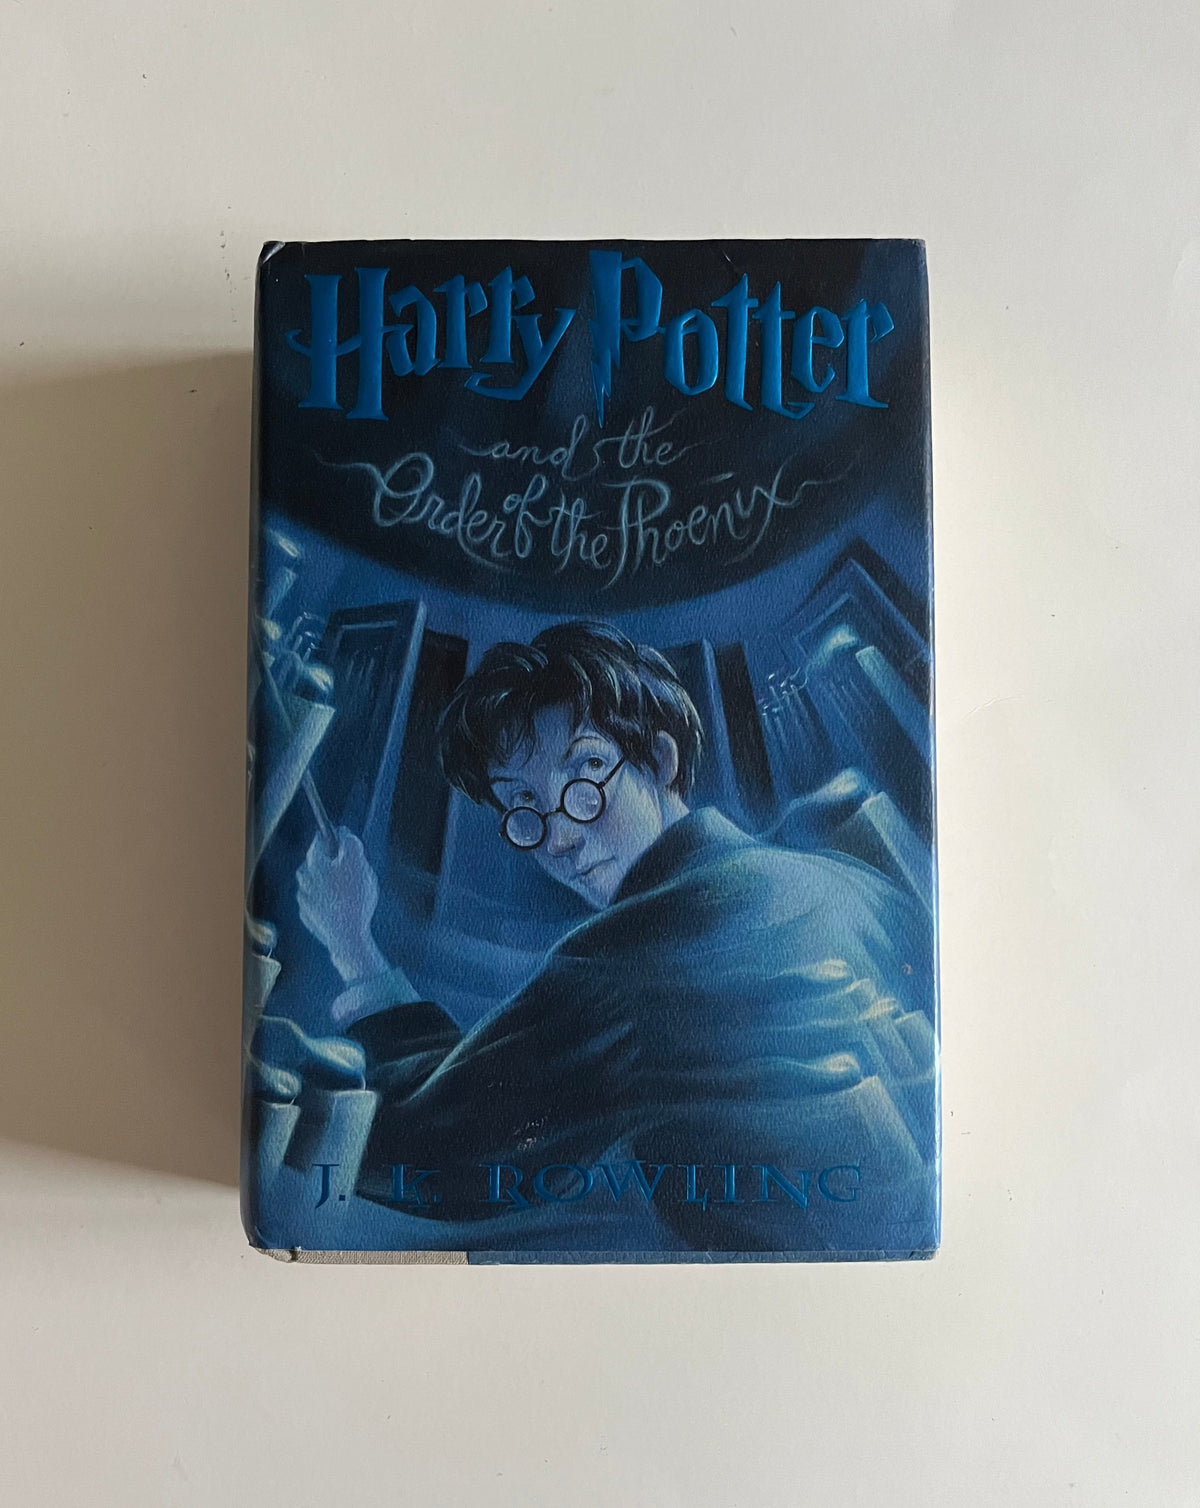 Harry Potter &amp; the Order of the Phoenix by JK Rowling